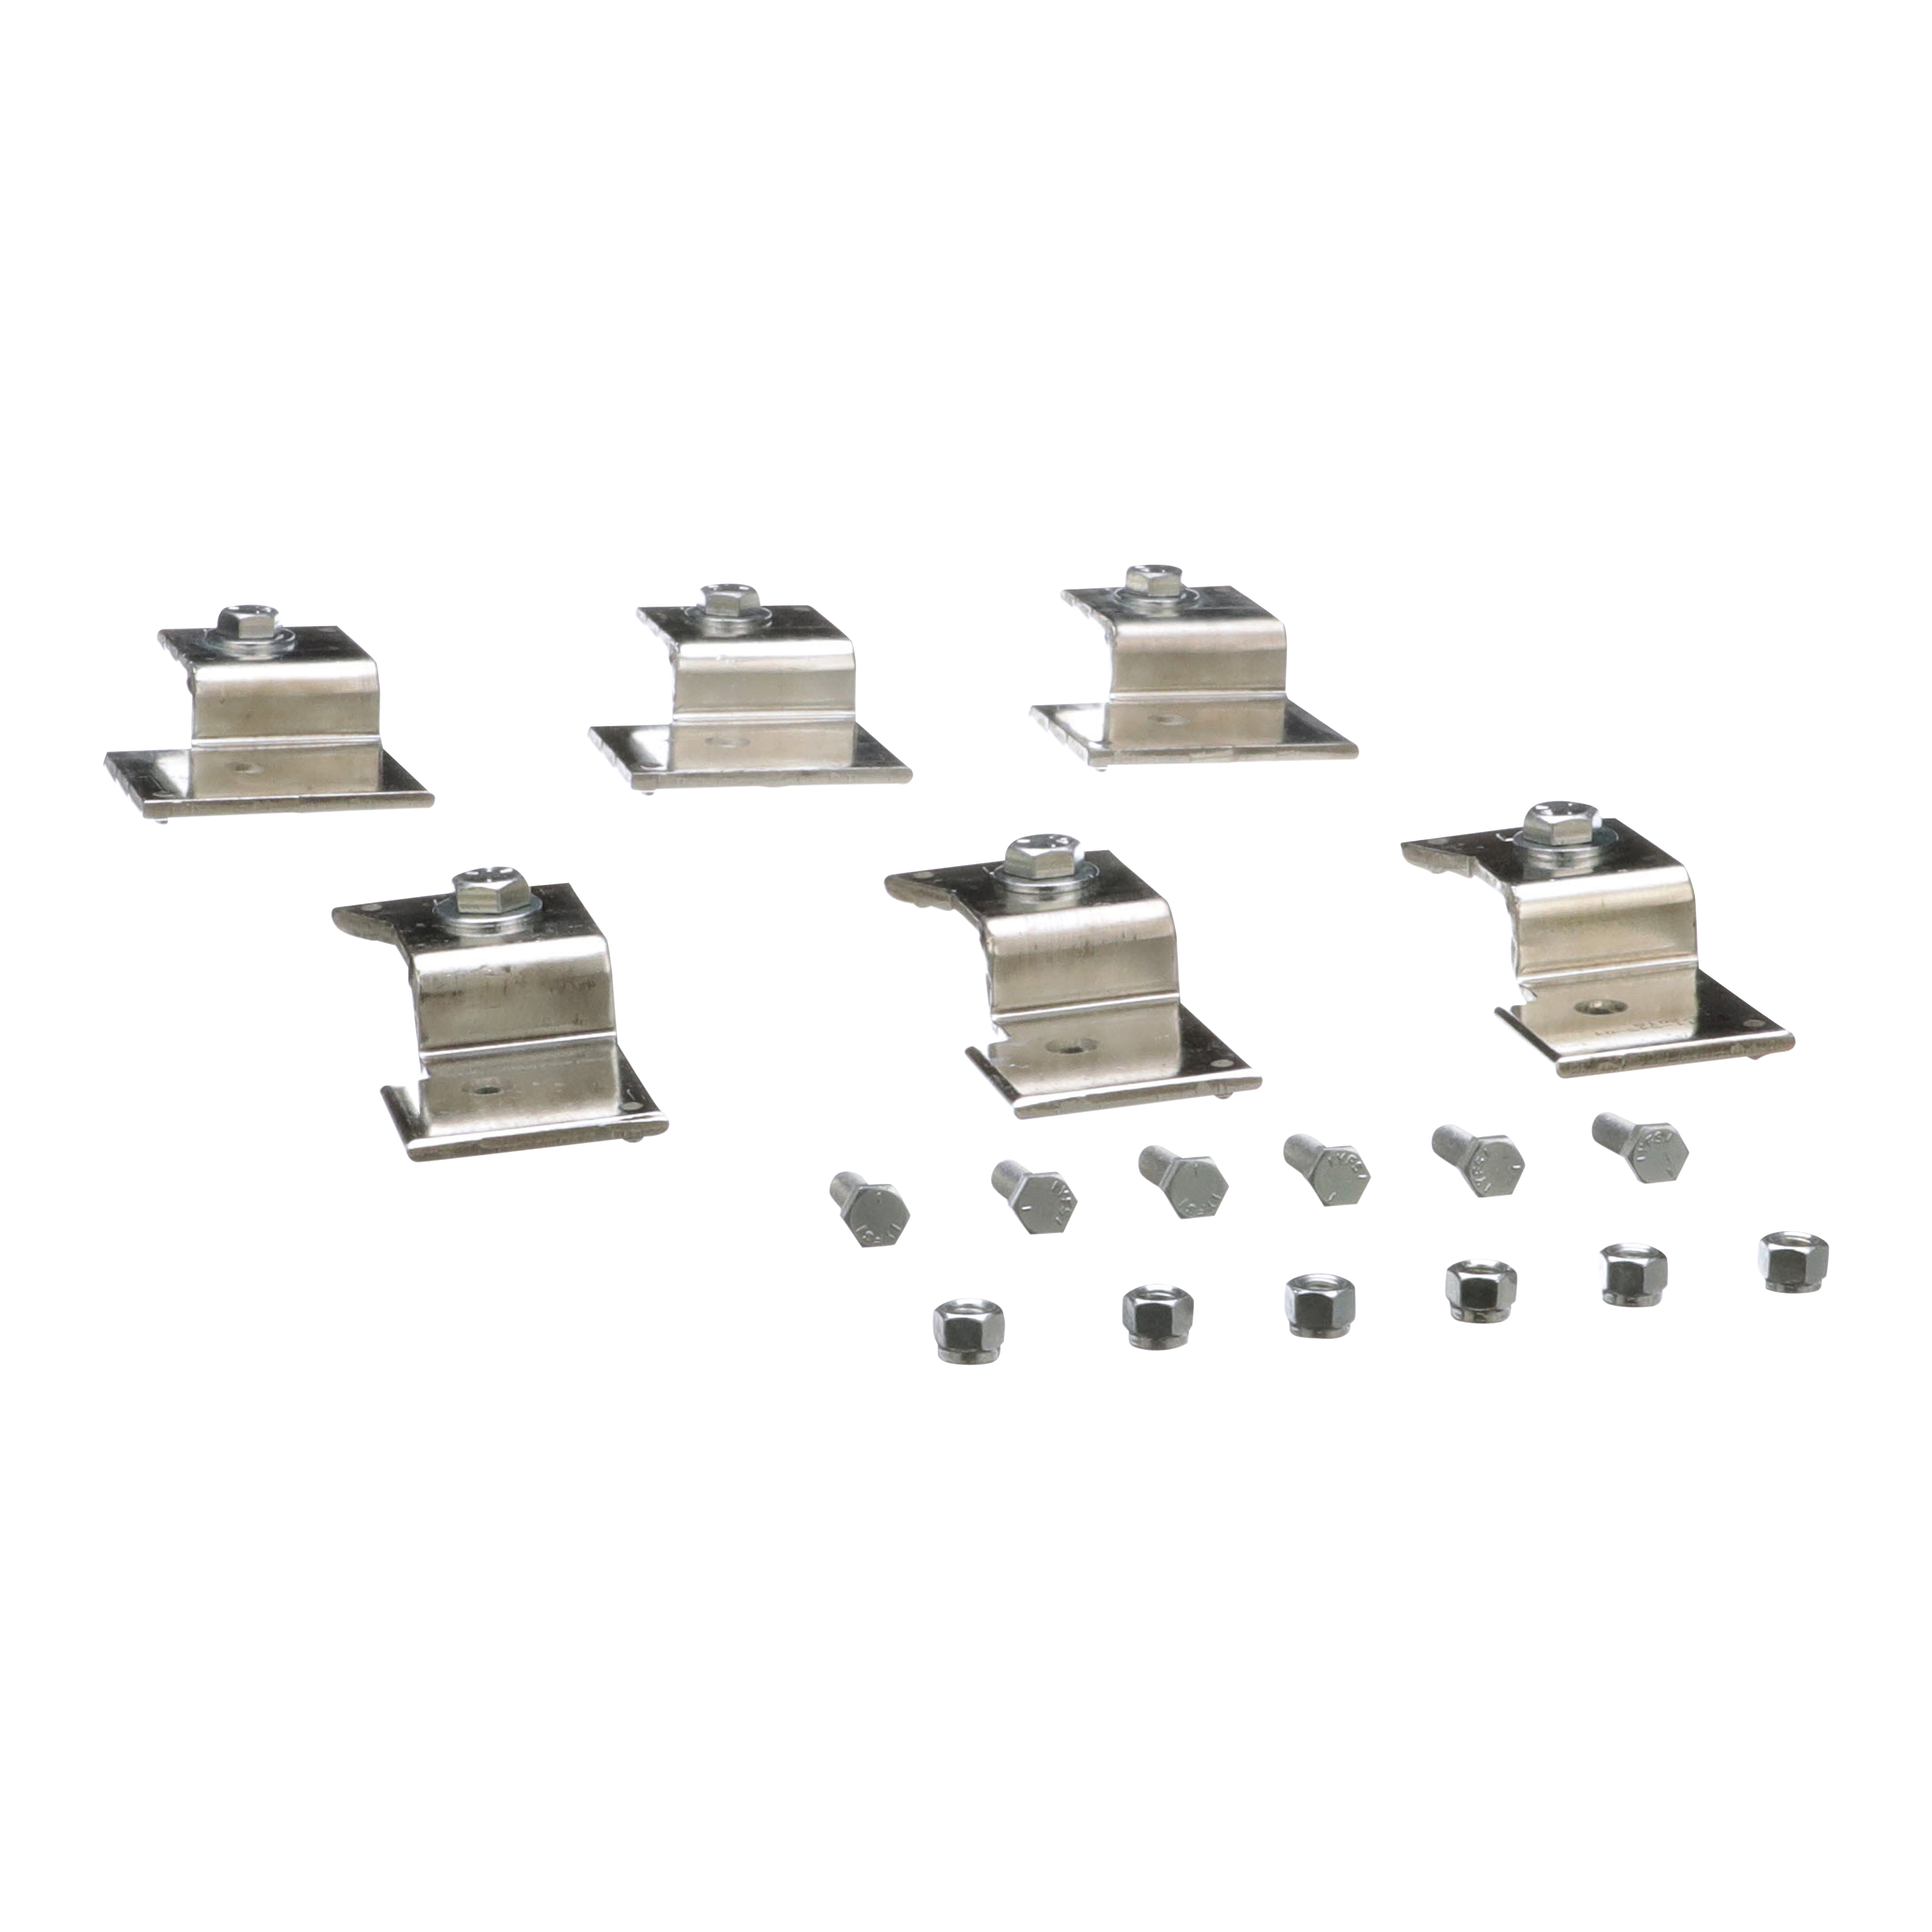 Fuse adapter kit, safety switch, 600A heavy switches, J fuses, Series E1-E2